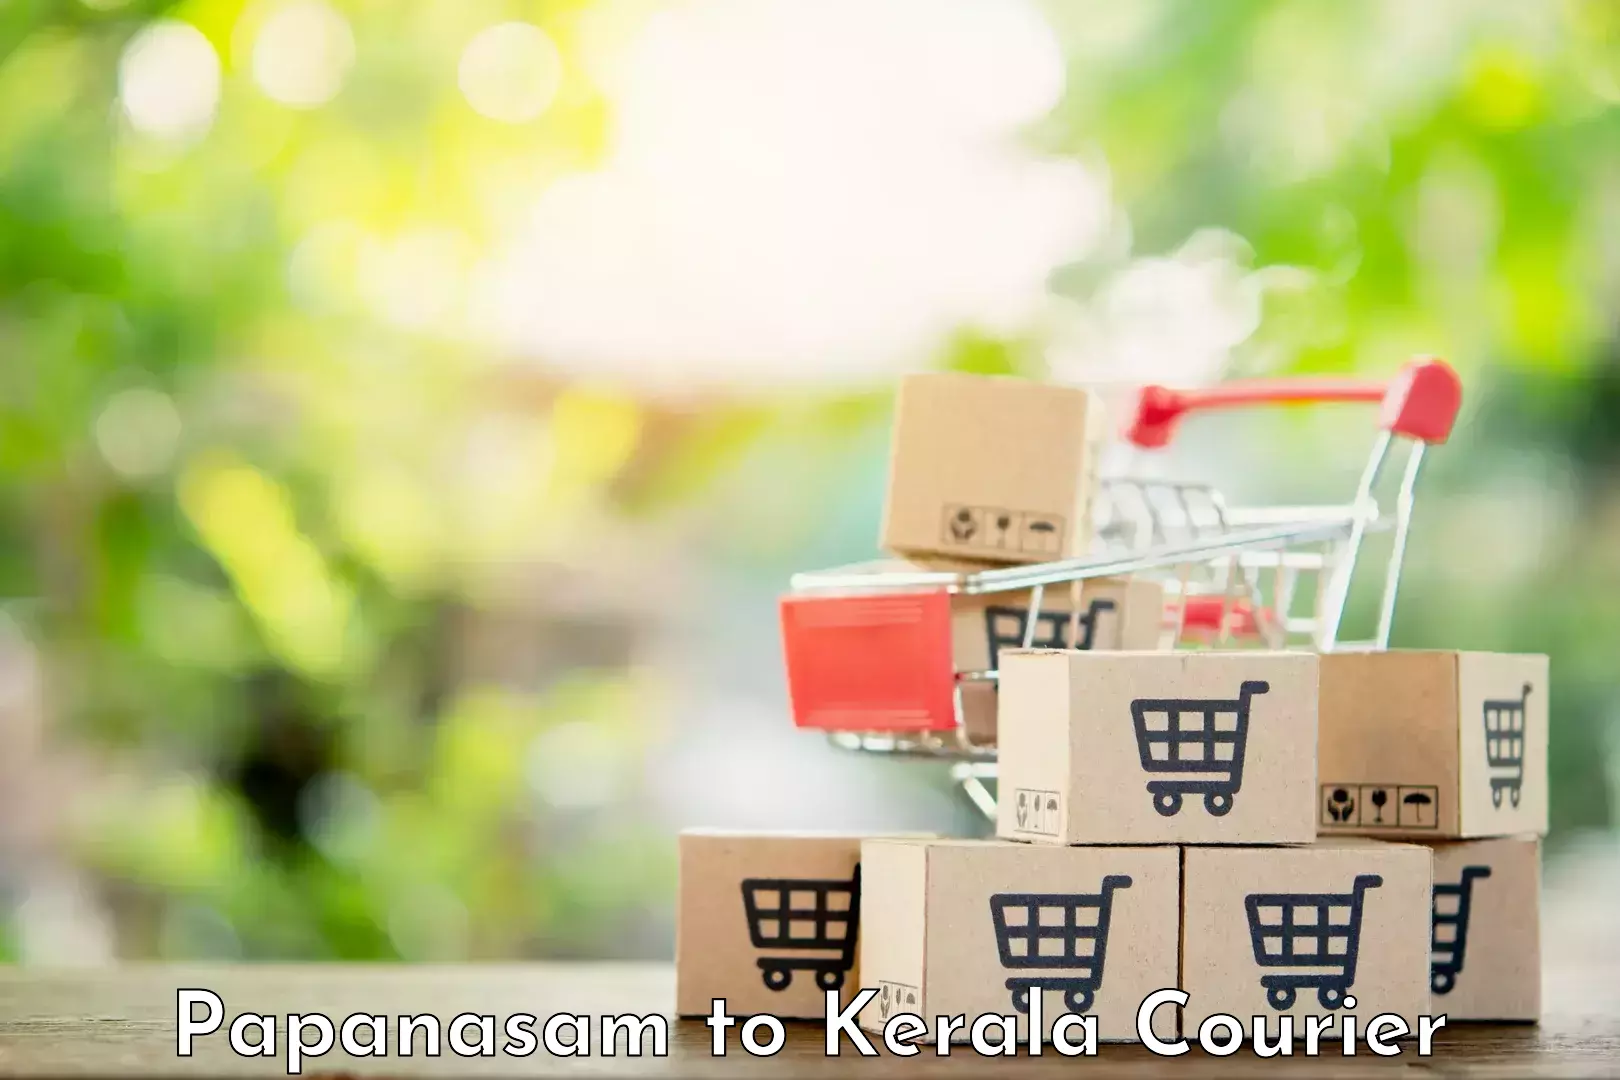 24-hour courier service in Papanasam to Pazhayannur